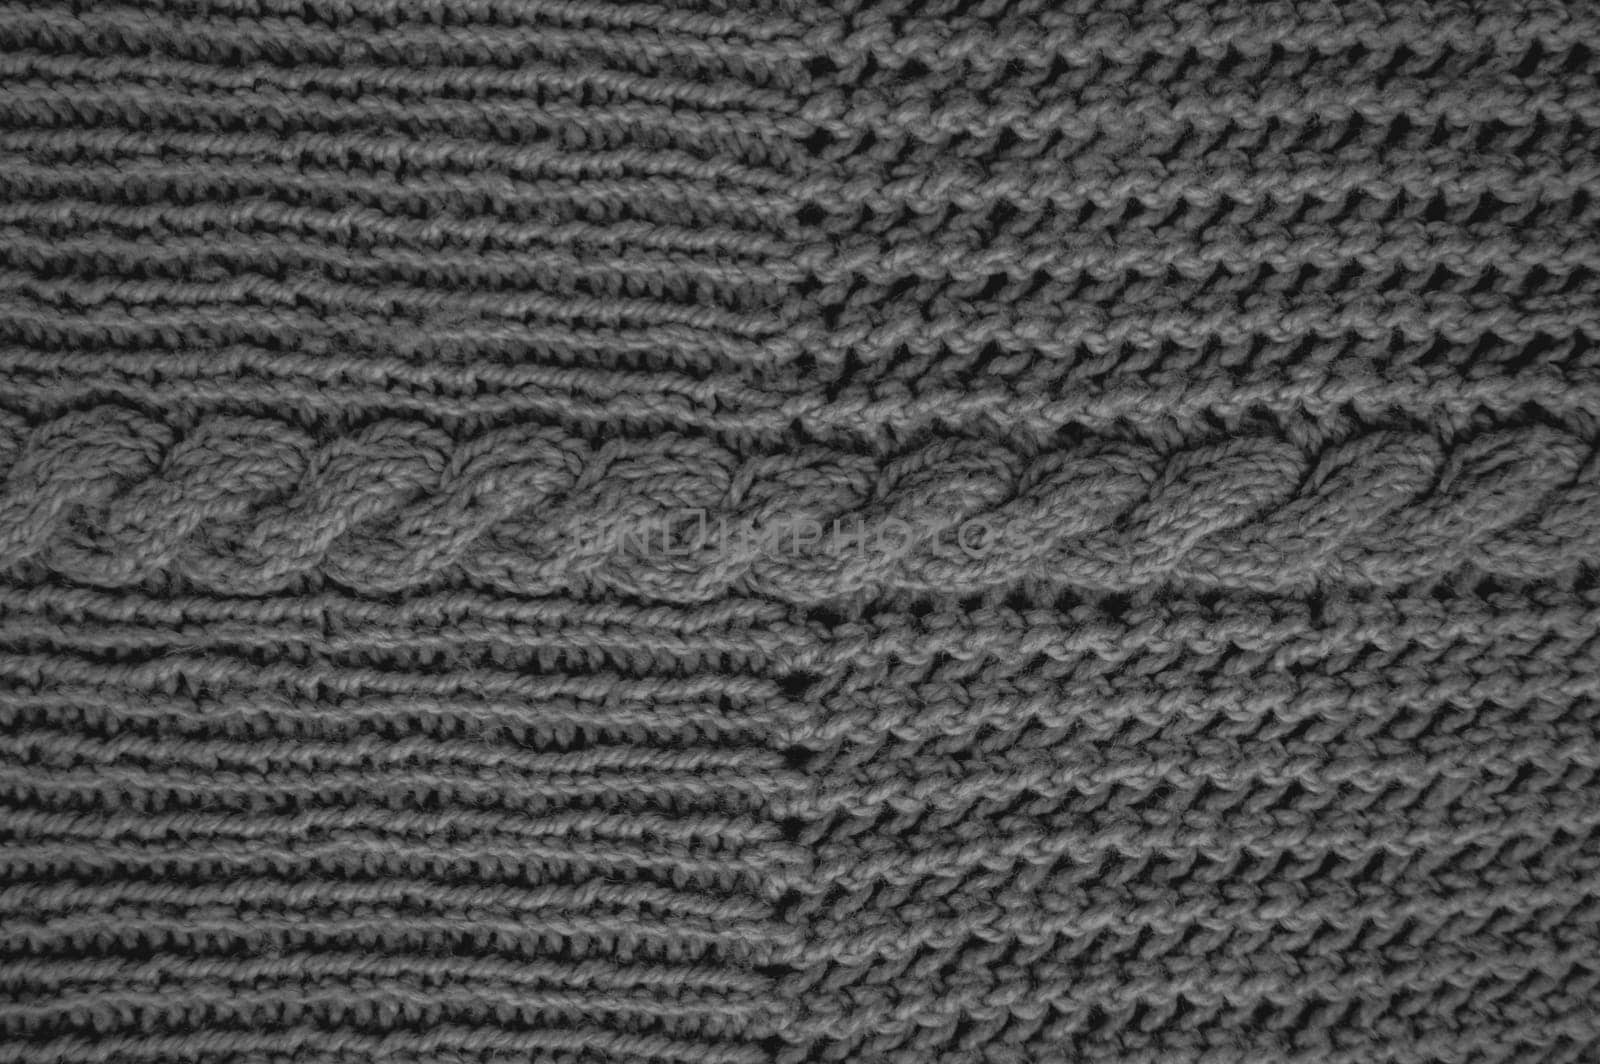 Pattern Knit. Vintage Wool Texture. Cotton Knitwear Warm Background. Macro Pattern Knit. Dark Fiber Thread. Nordic Christmas Plaid. Structure Jumper Material. Detail Knitted Print.